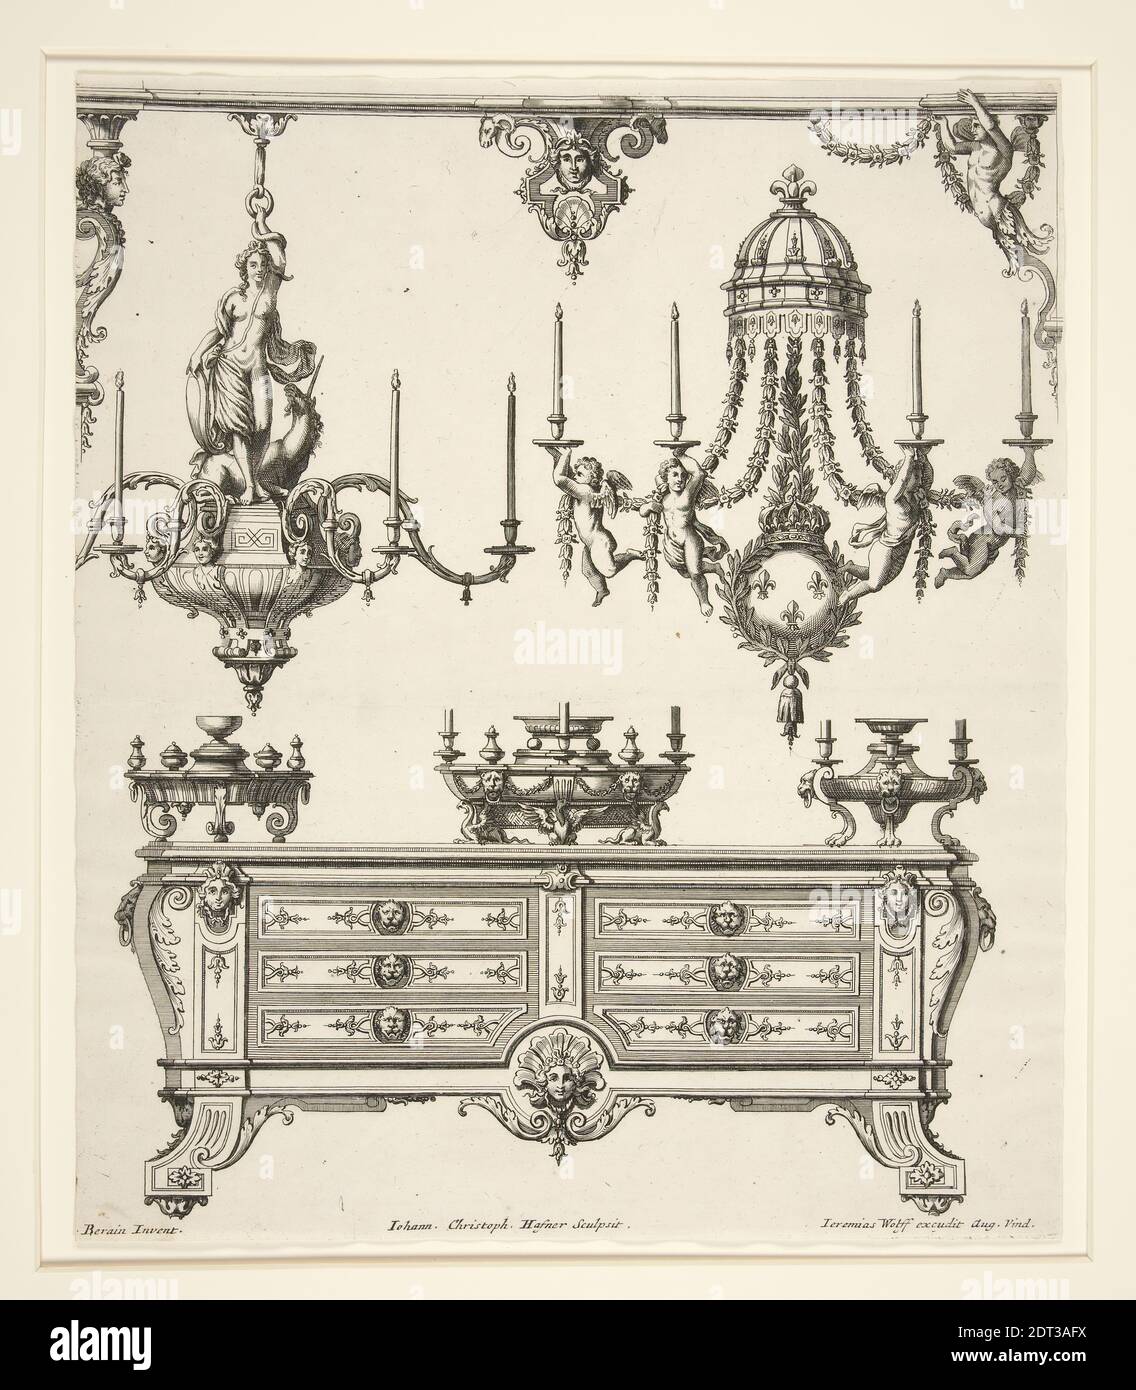 Artist: Johann Christoph Hafner, German, 1668–1754, After: Jean Bérain, French, 1640–1711, Sheet from Commodes et Lustres, Etching, sheet: 32.2 × 27.1 cm (12 11/16 × 10 11/16 in.), Made in Germany, German, 17th century, Works on Paper - Prints Stock Photo